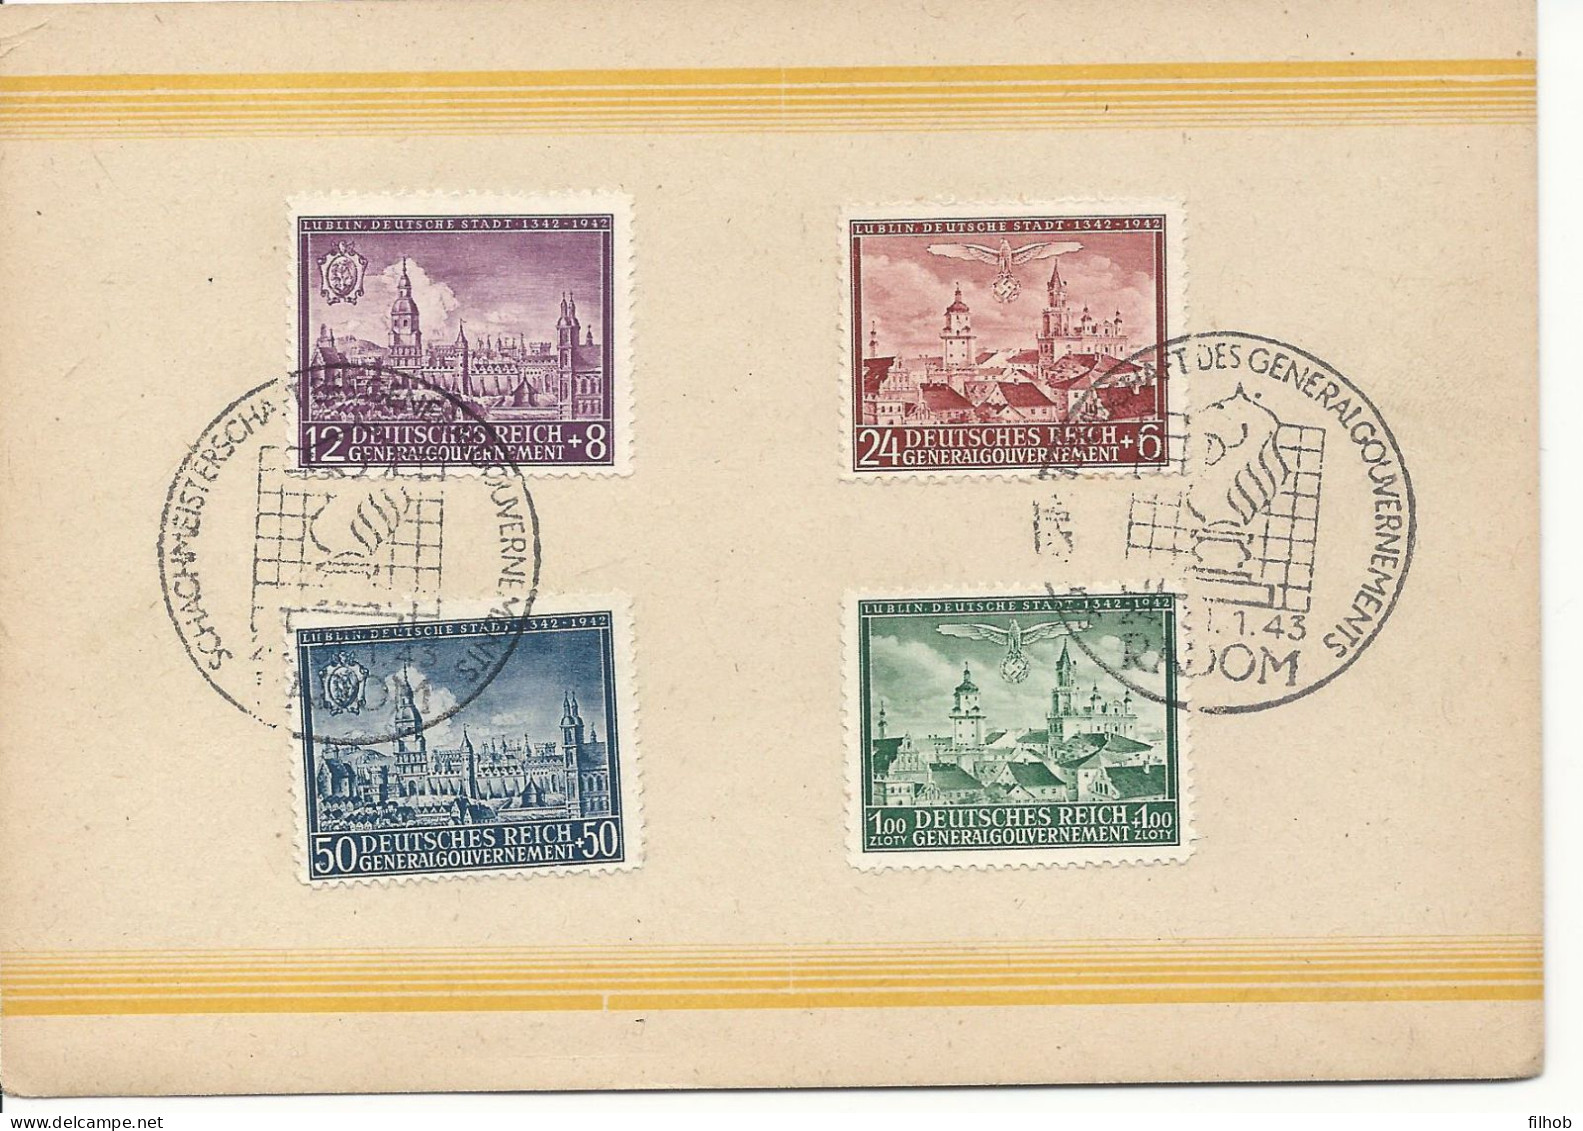 Poland GG Postmark (A211): 1943.01.24 Radom Sport Chess Competition - General Government